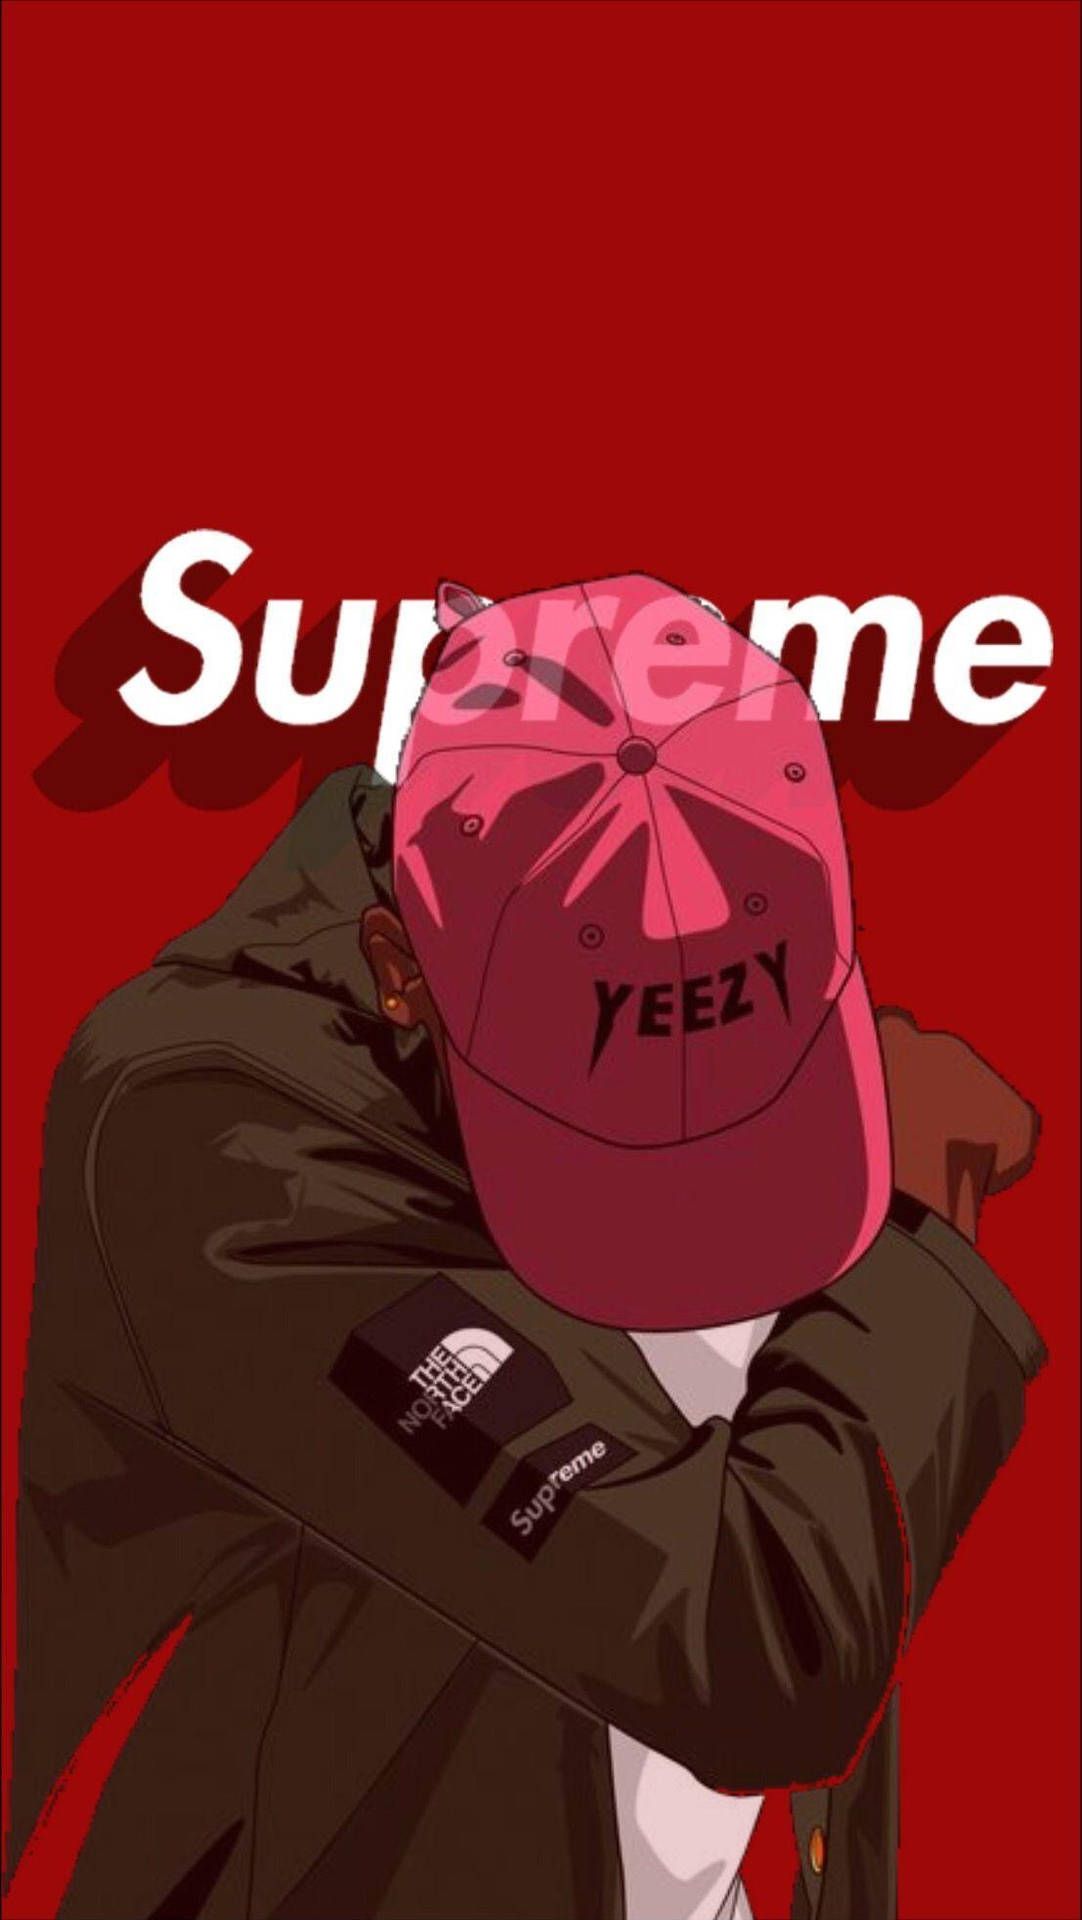 Yeezy wallpaper supreme phone background with high-resolution 1080x1920 pixel. You can use this wallpaper for your iPhone 5, 6, 7, 8, X, XS, XR backgrounds, Mobile Screensaver, or iPad Lock Screen - Supreme